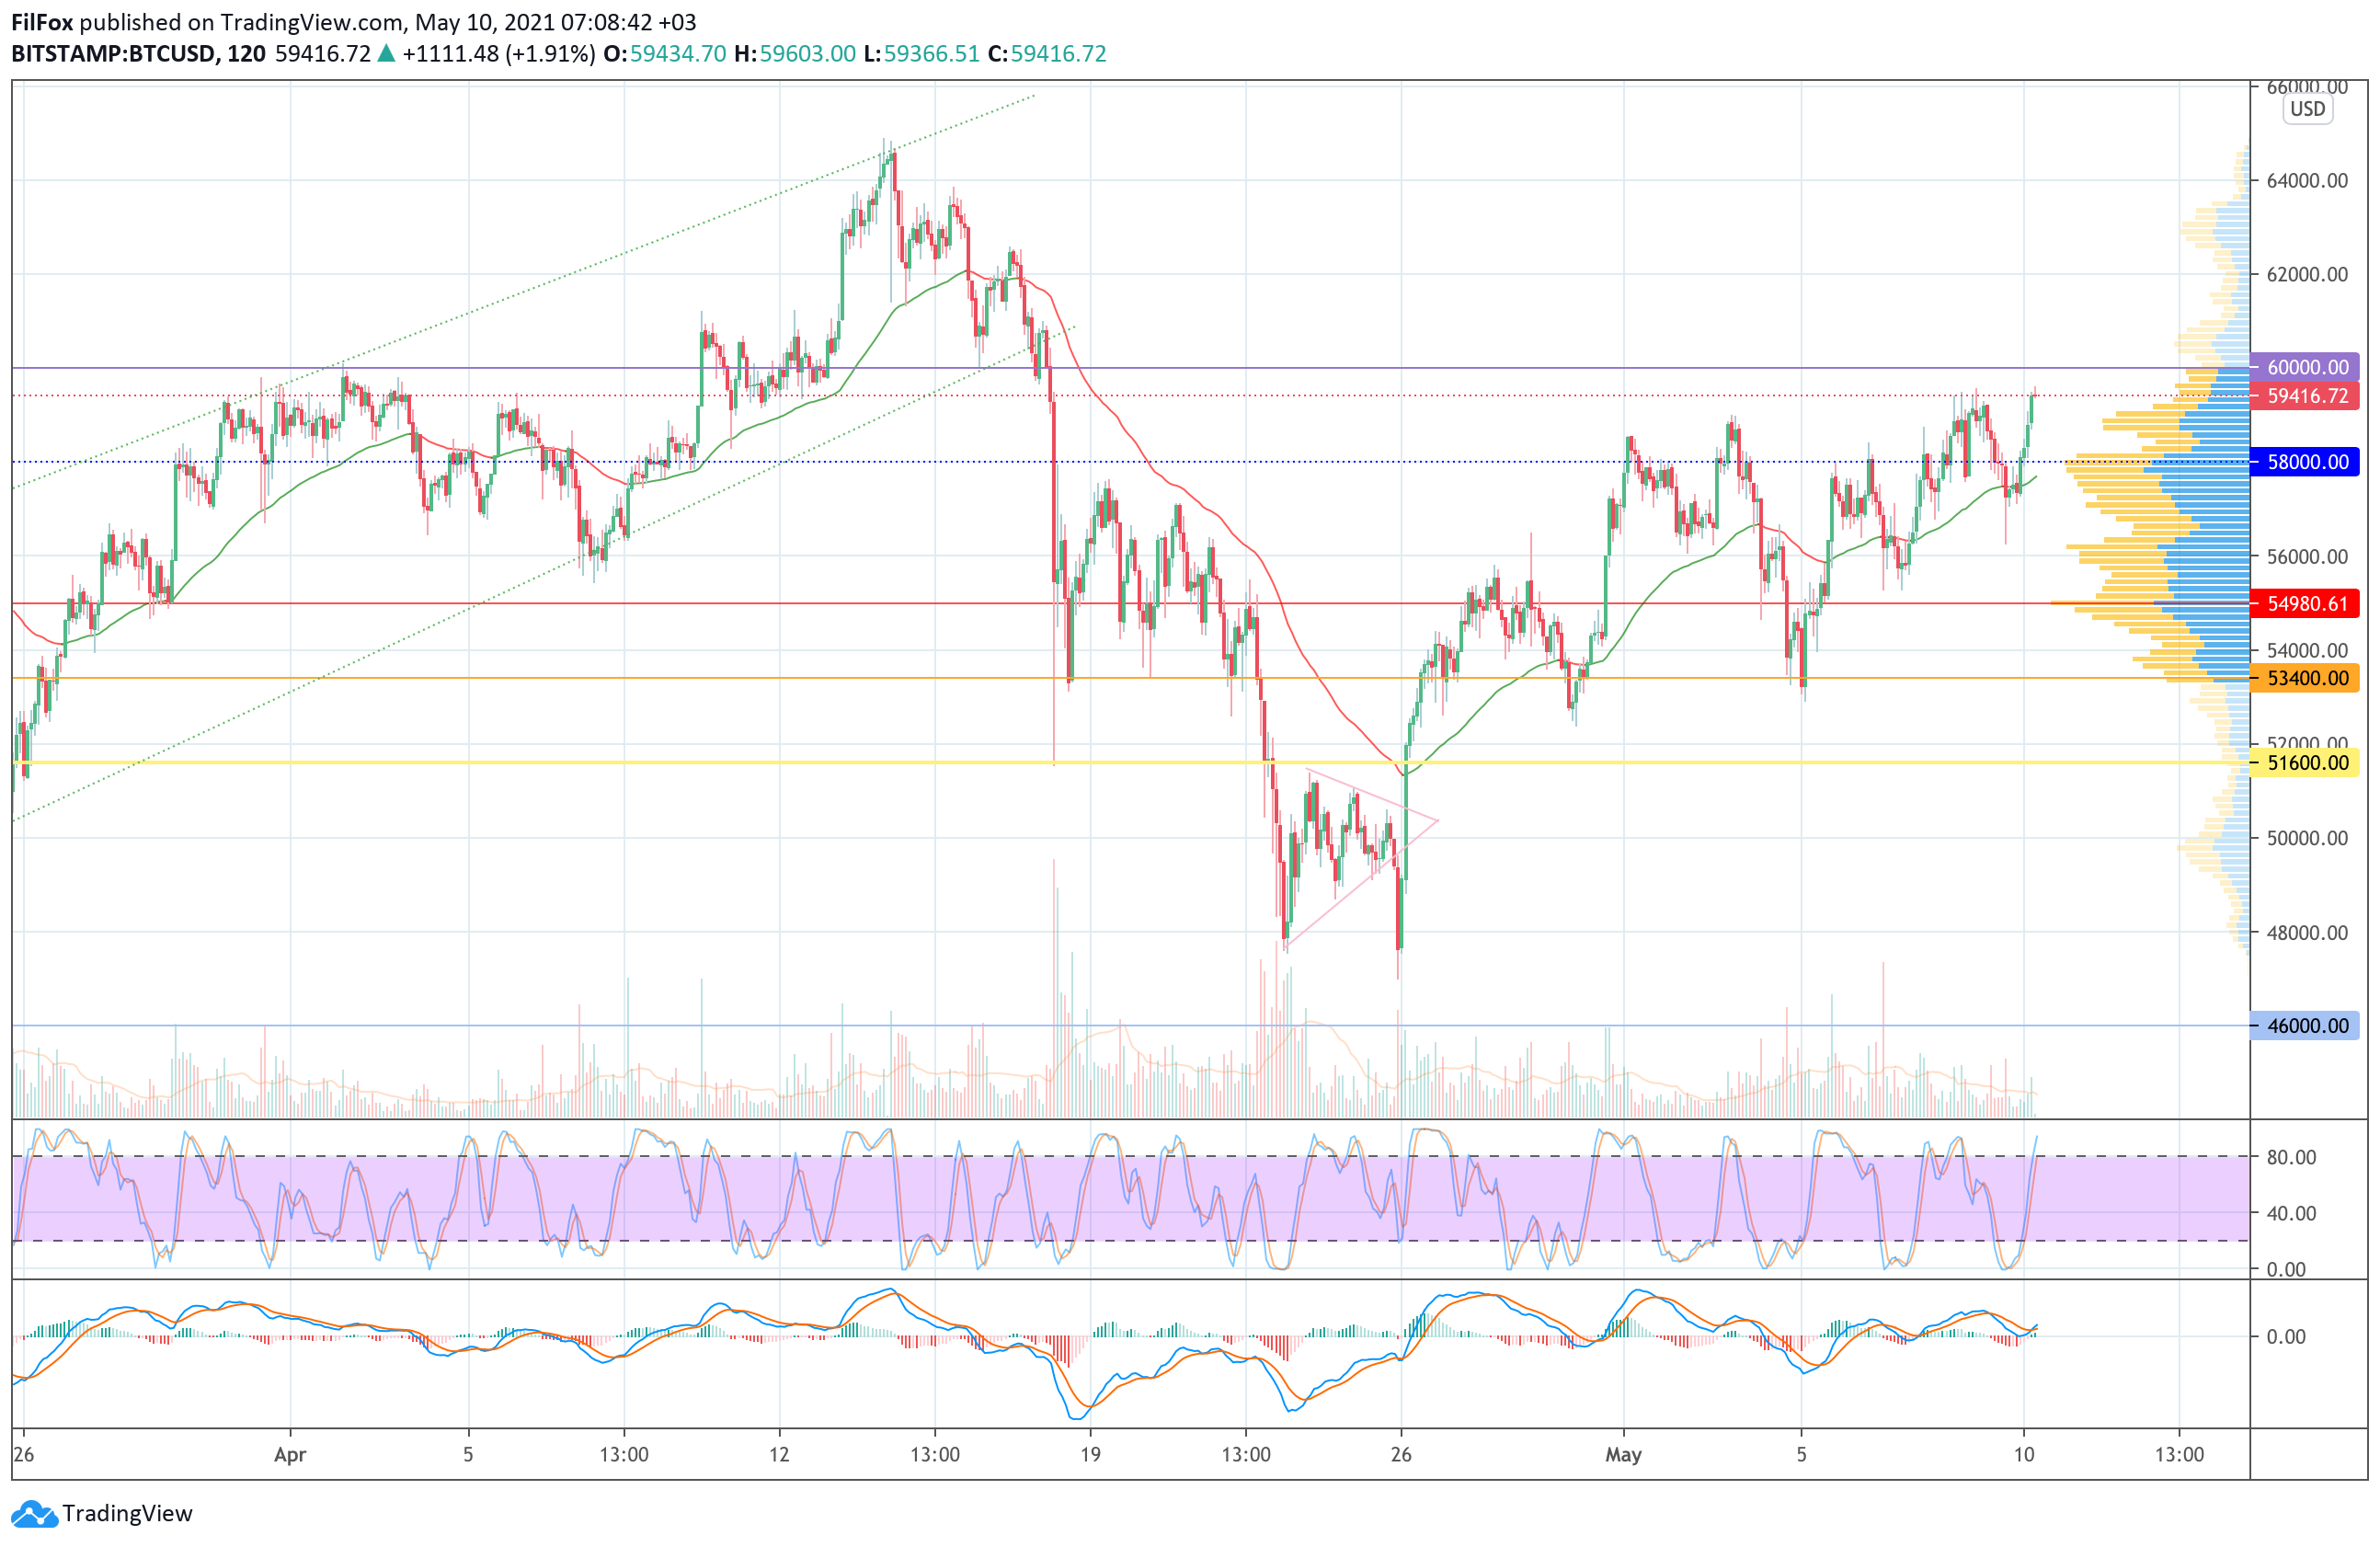 Analysis of the prices of Bitcoin, Ethereum, XRP for 05/10/2021